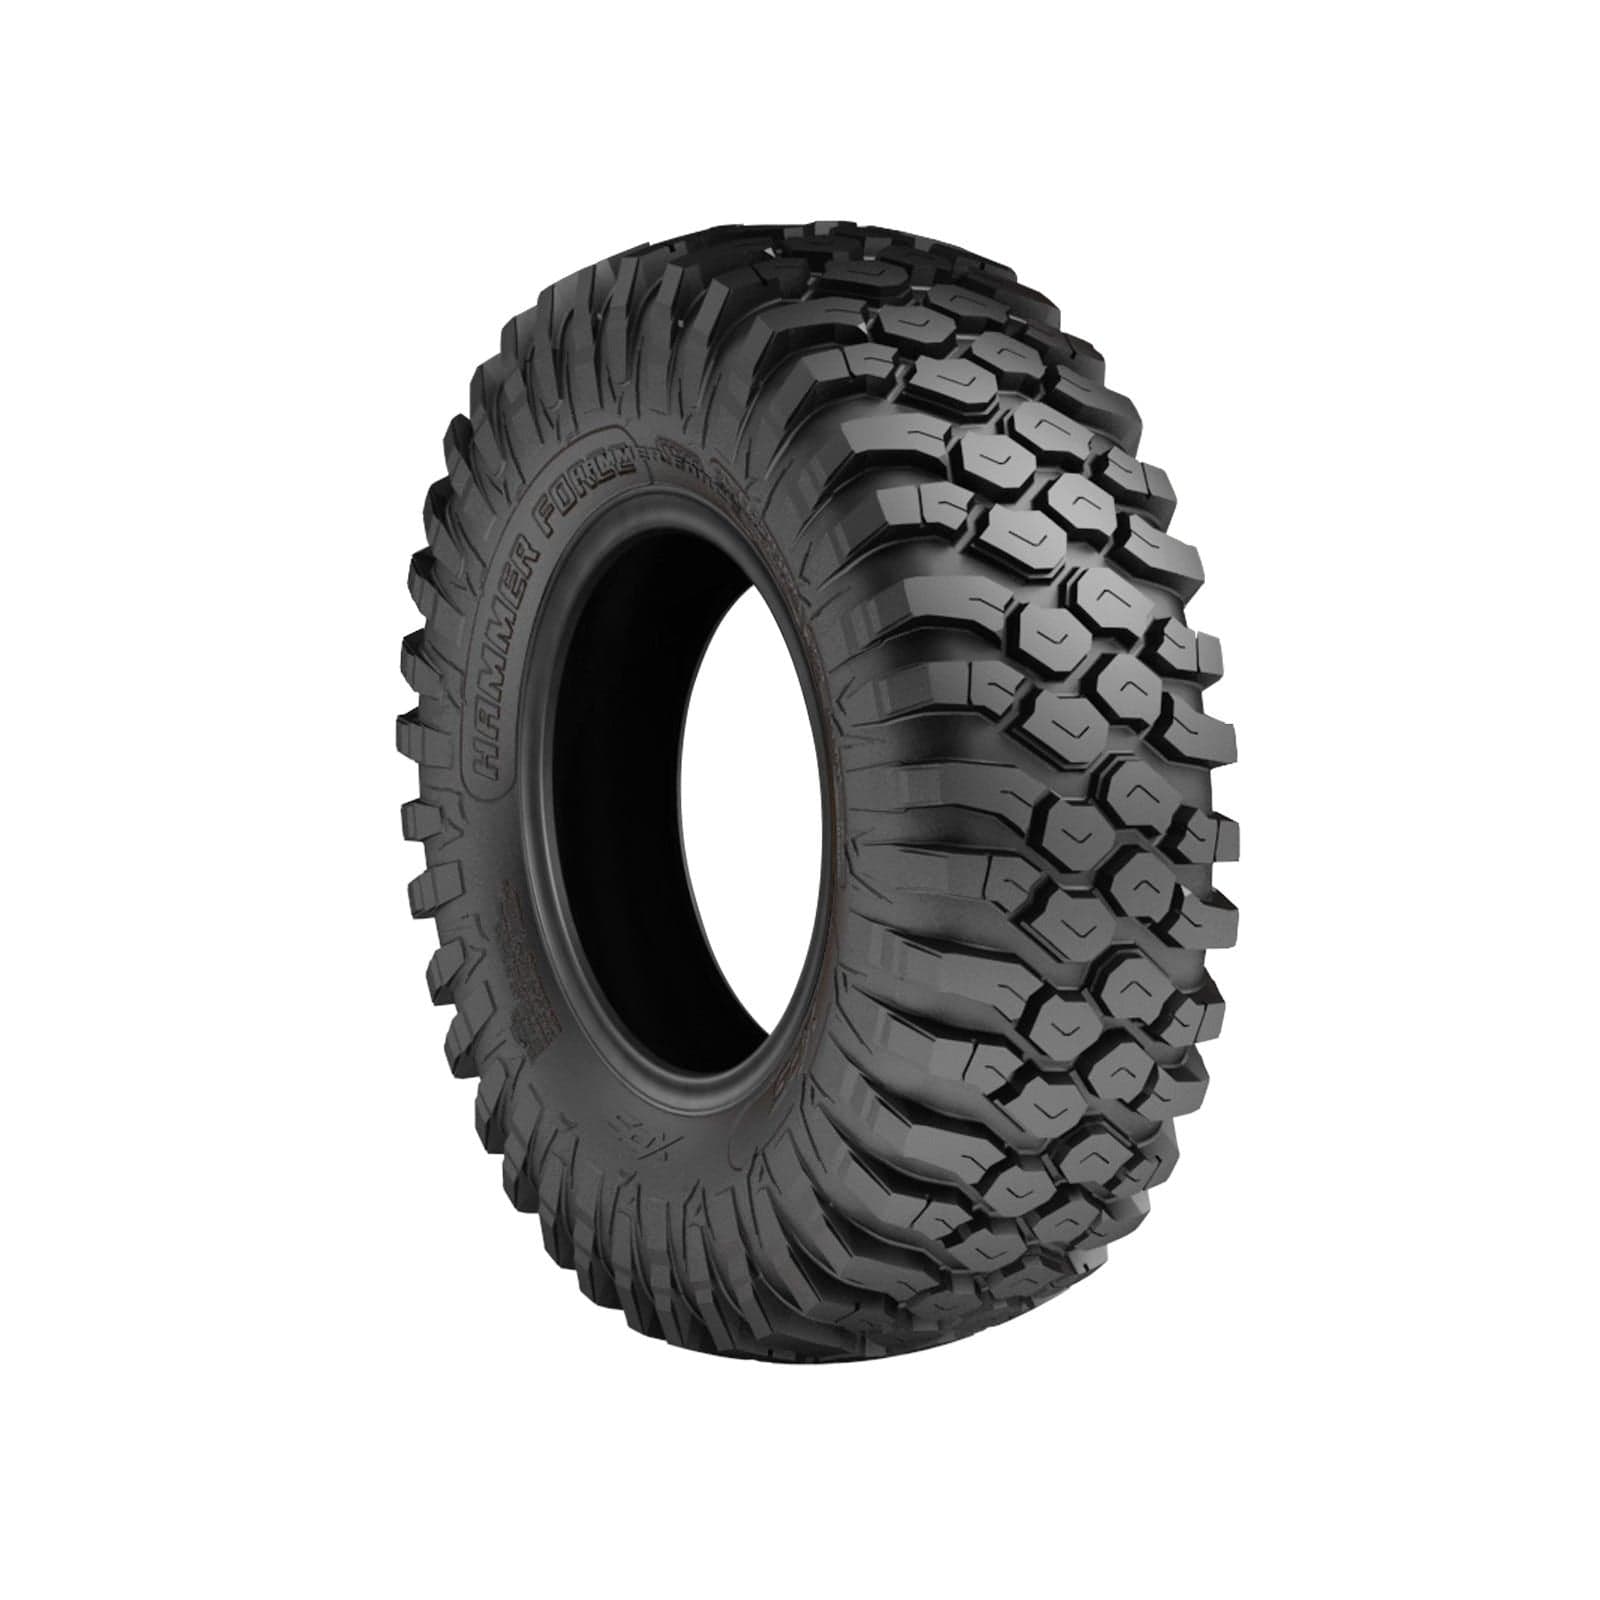 XPS Hammer Force Tire